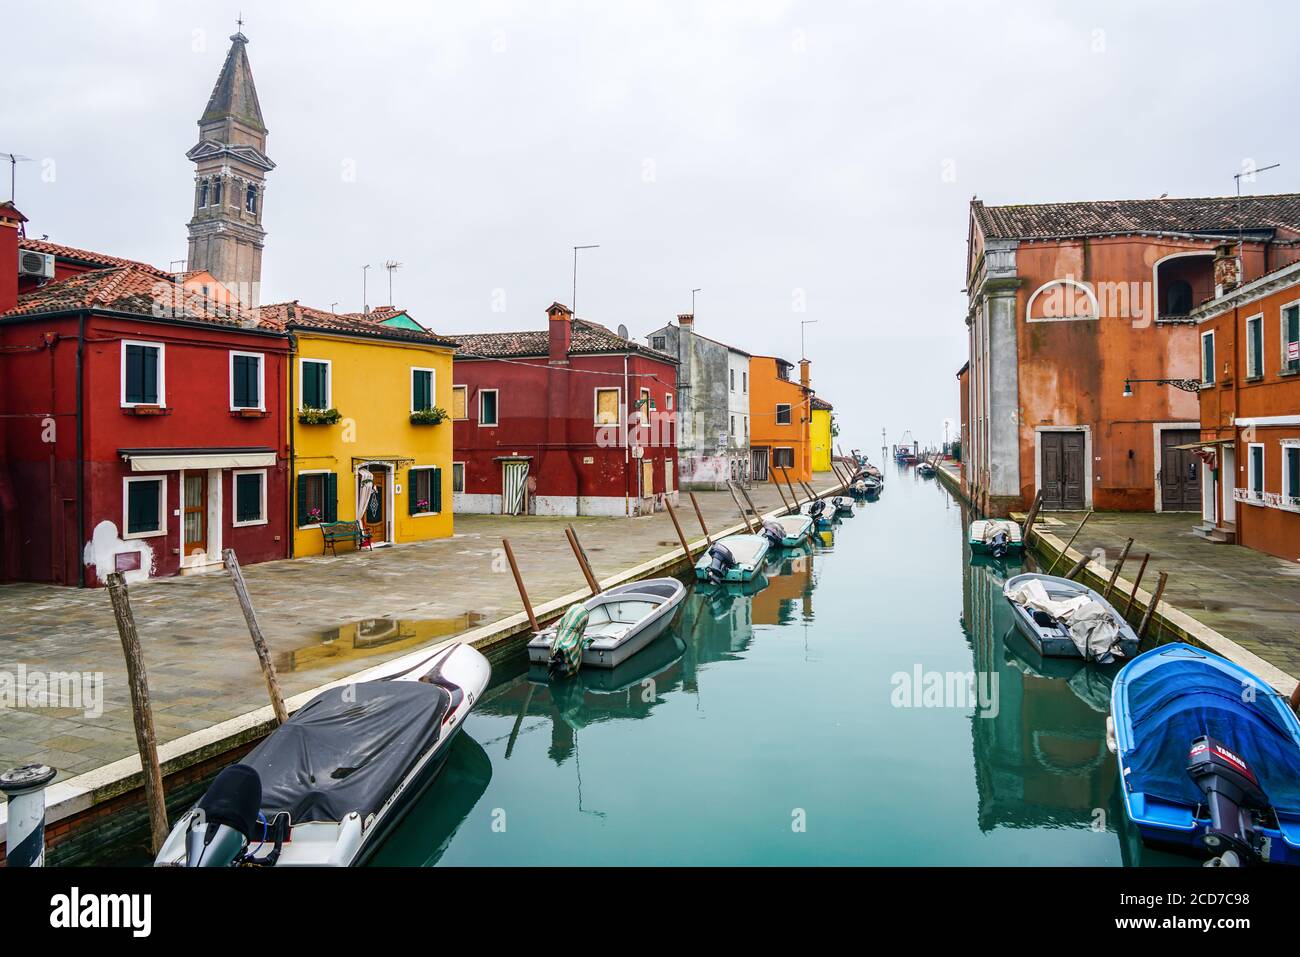 Beautiful canal in Burano with the typical colorful houses and the leaning campanile (bell tower) of San Martino Church. Stock Photo